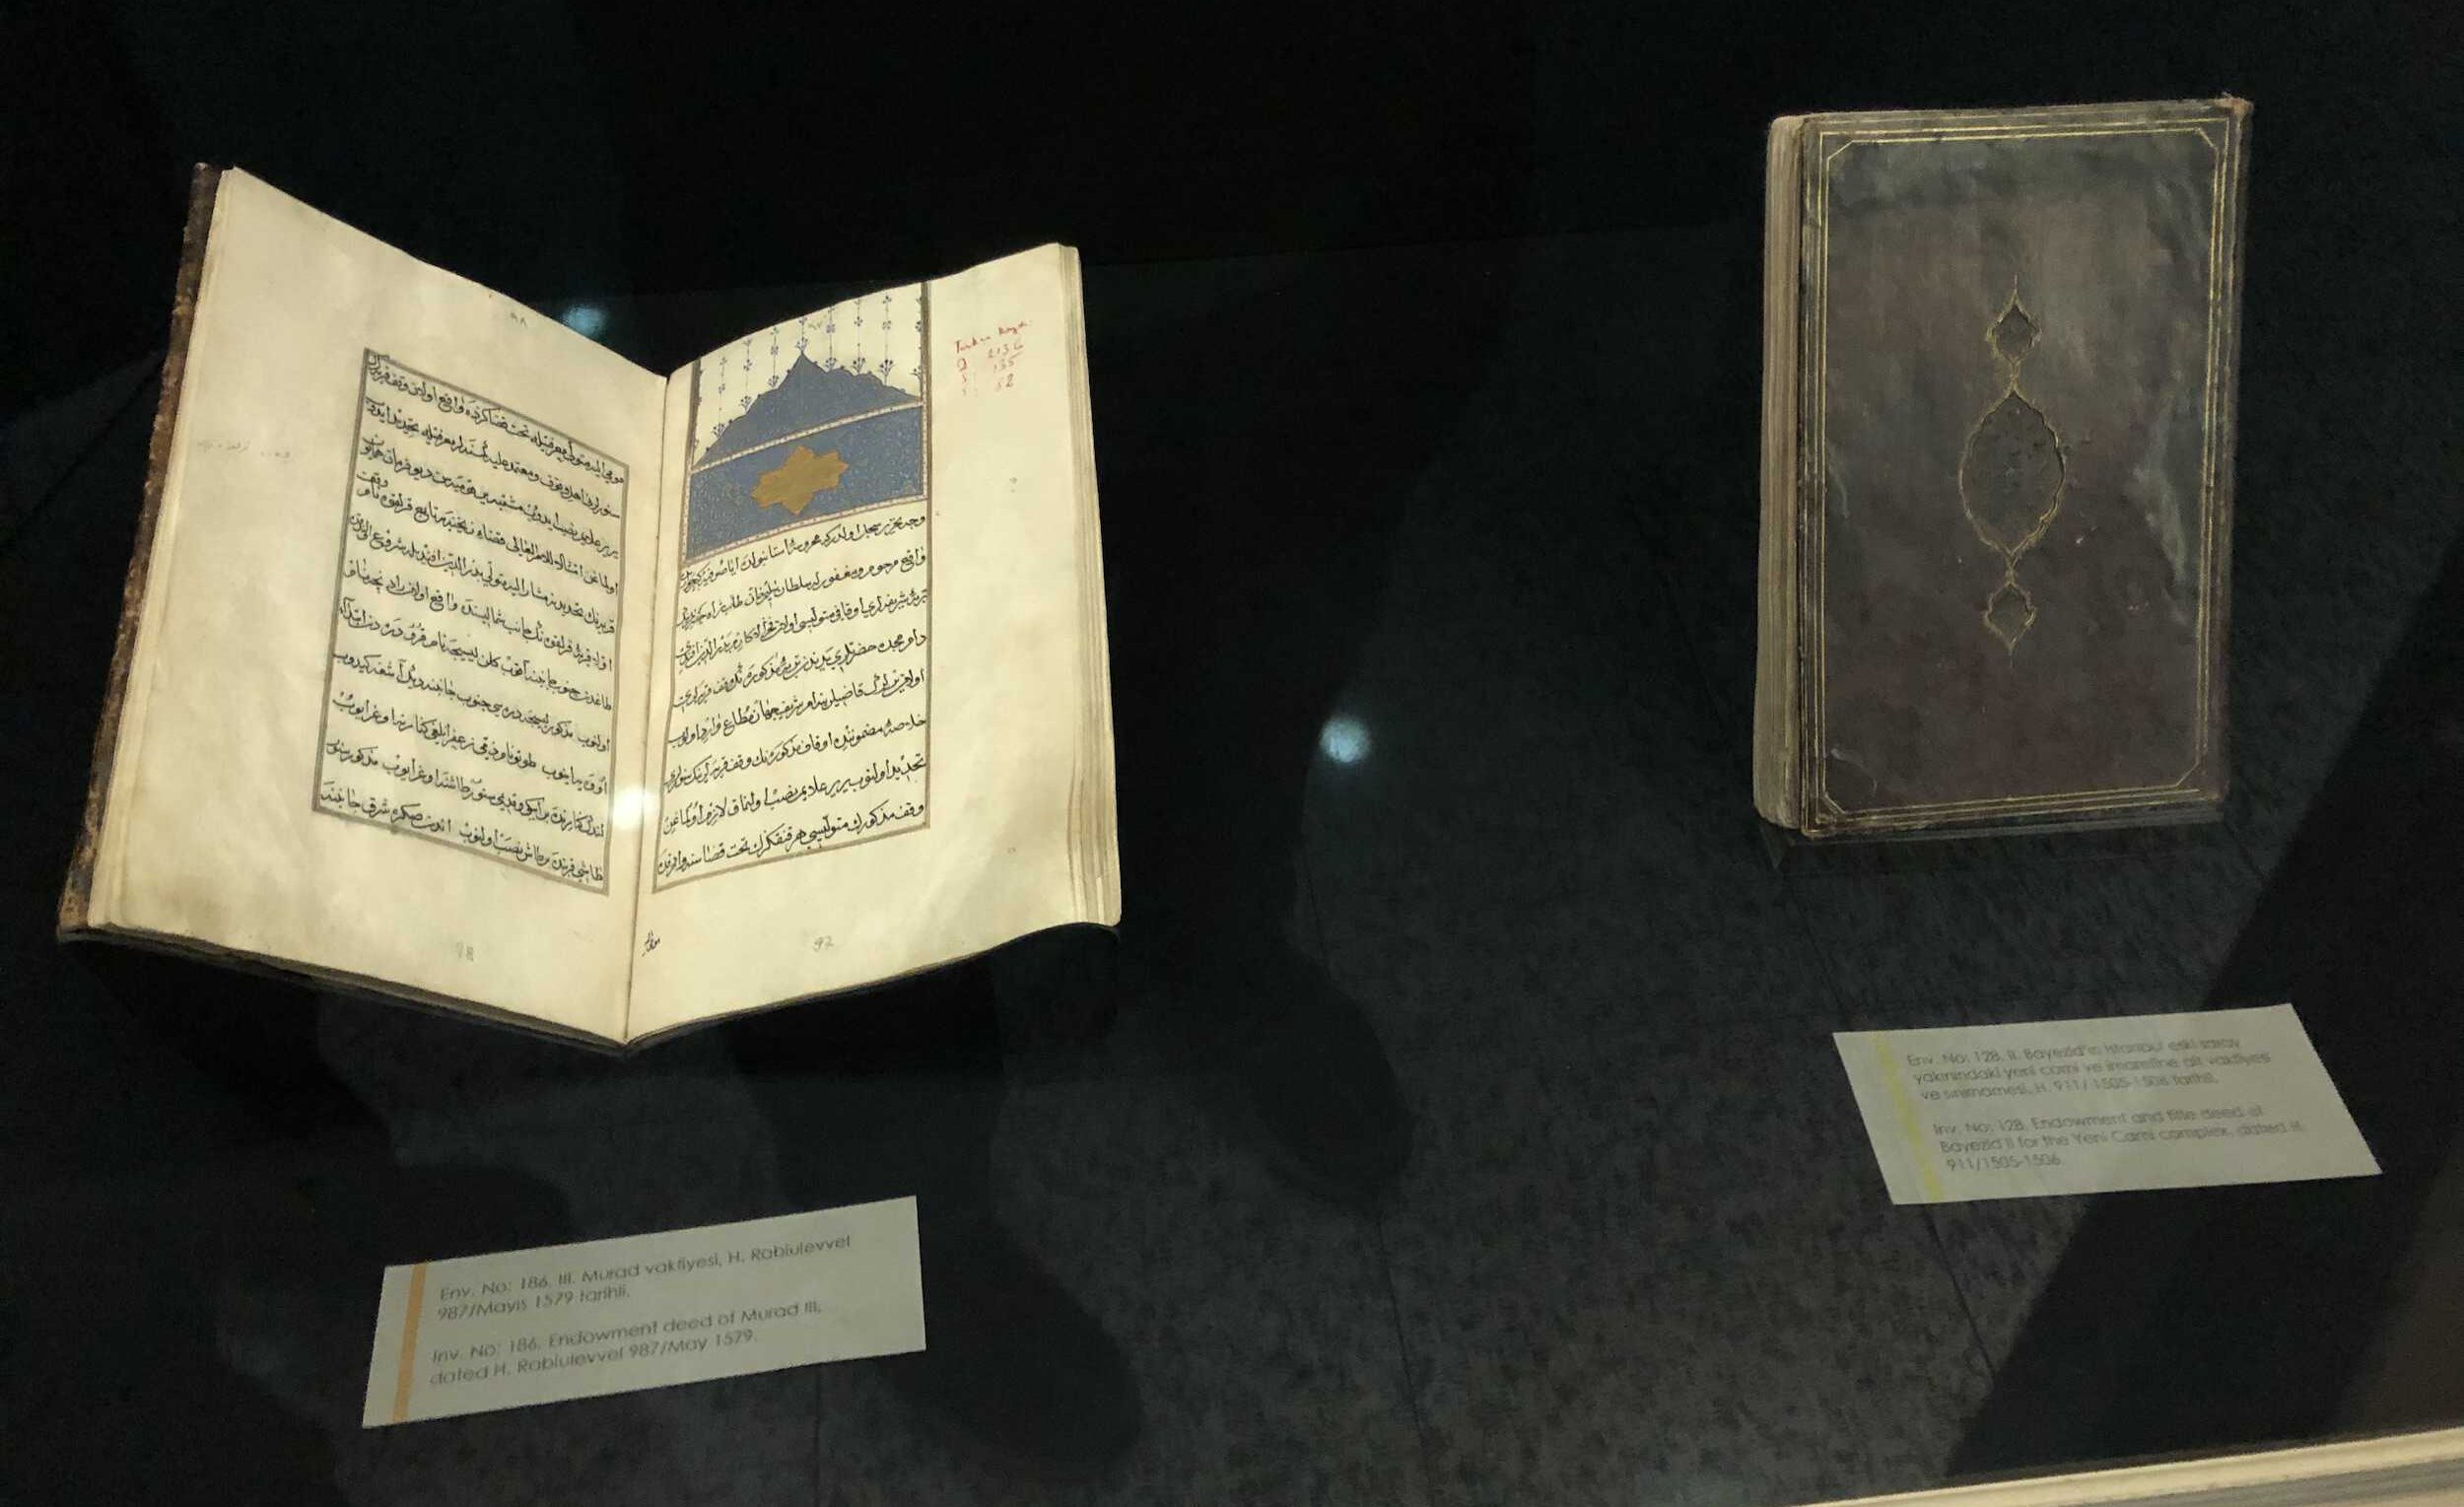 Endowment deed of Sultan Murad III dated May 1579 (left) and endowment and title deed of Sultan Bayezid II for the New Mosque complex near the Old Palace in Constantinople (now Istanbul), dated 1505-1506 (right)